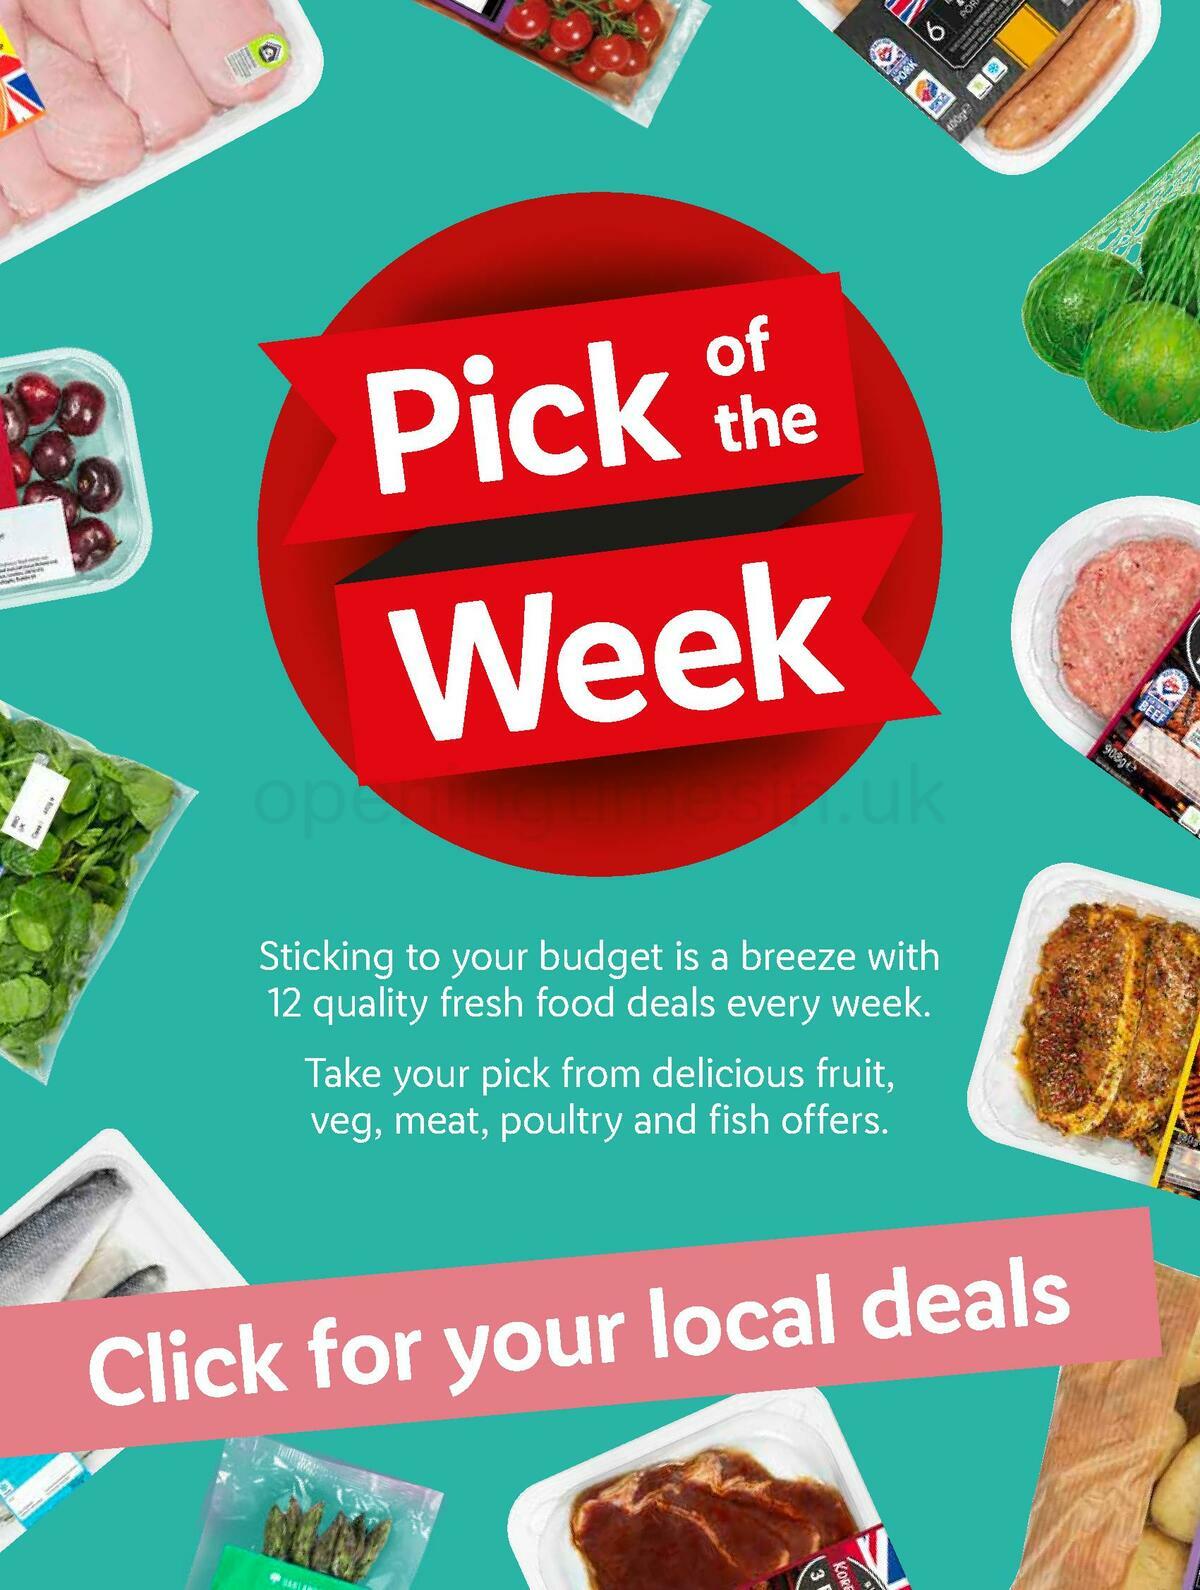 LIDL Offers from 22 September